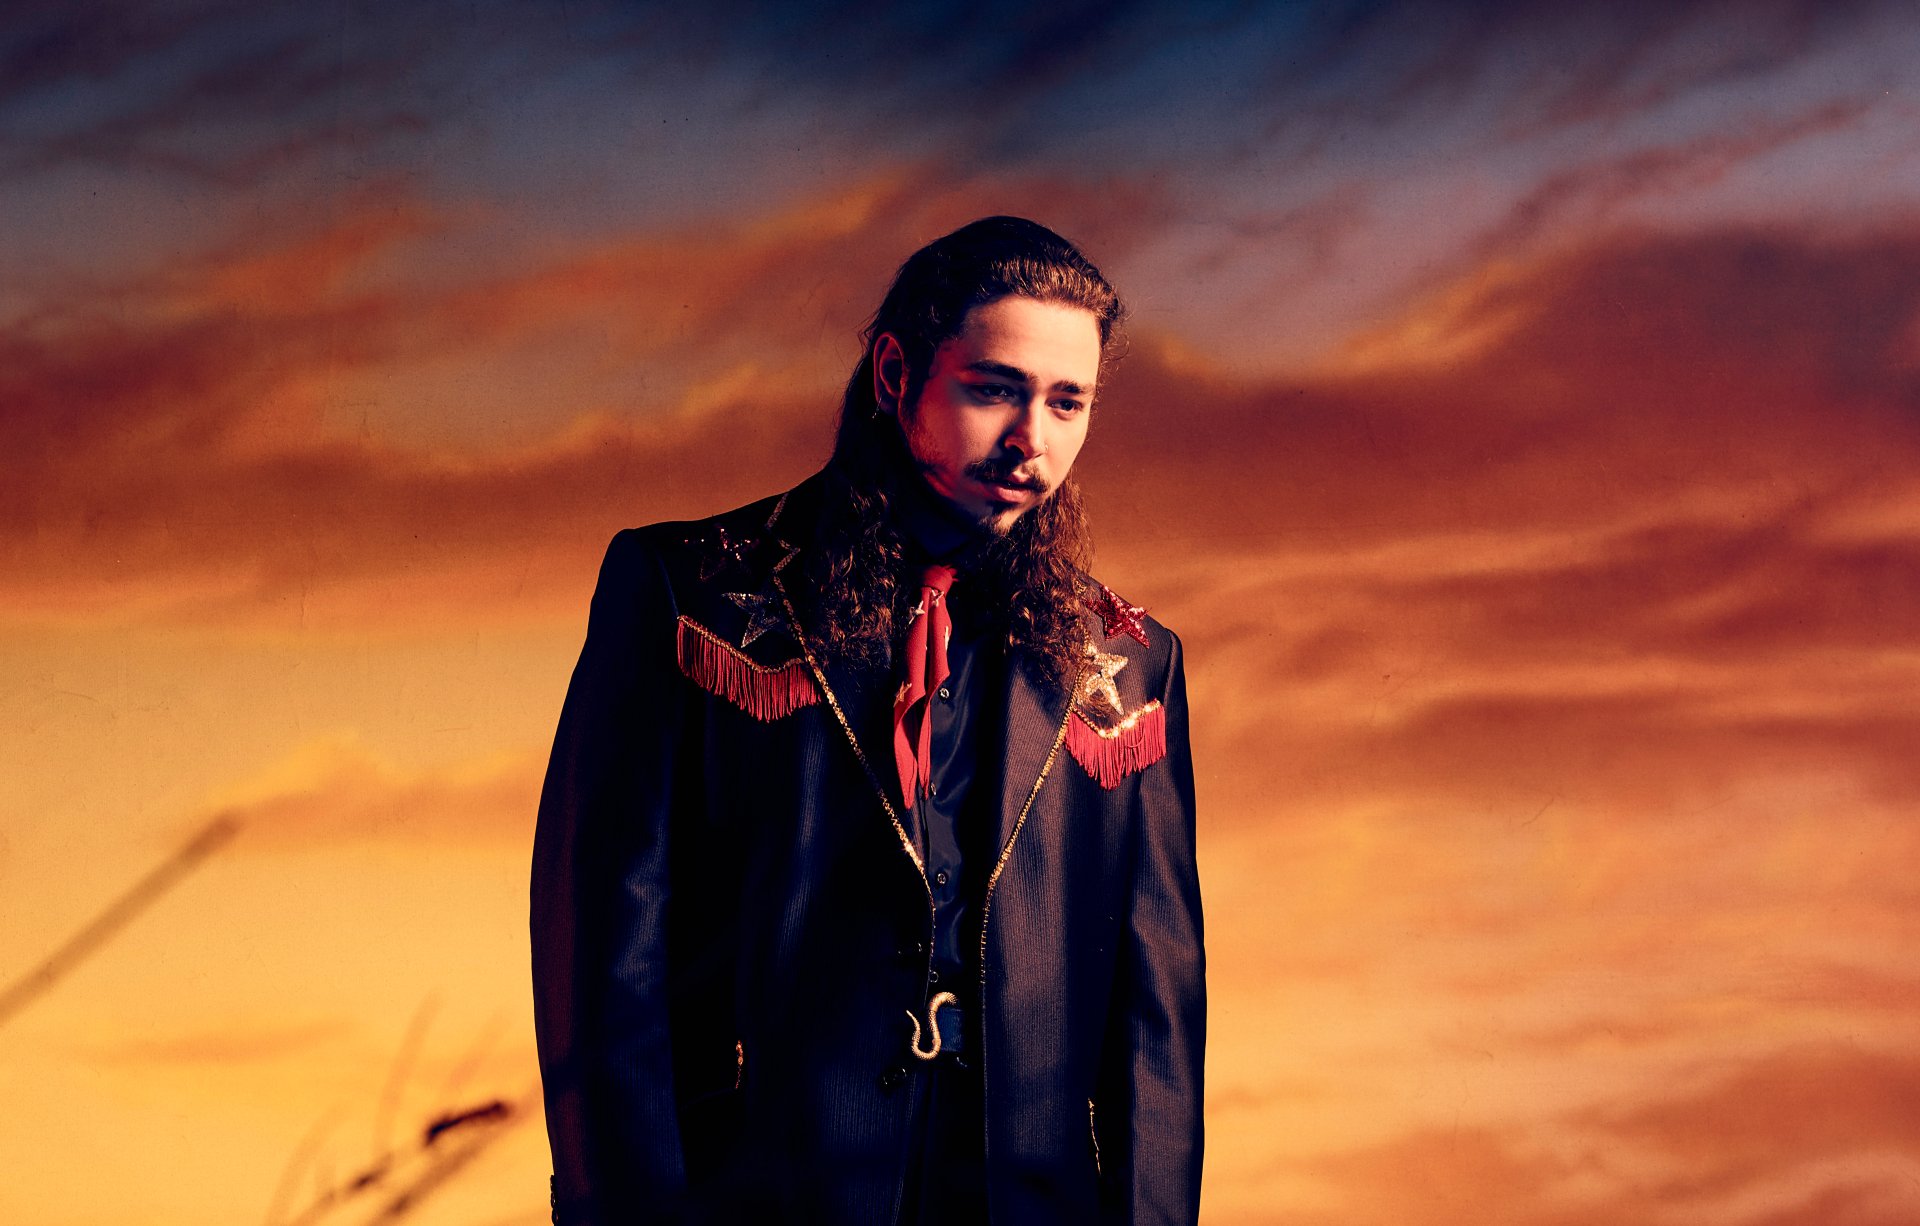 Post Malone Post Malone. Post Malone 2015. Post Malone Photoshoot. Post malone now